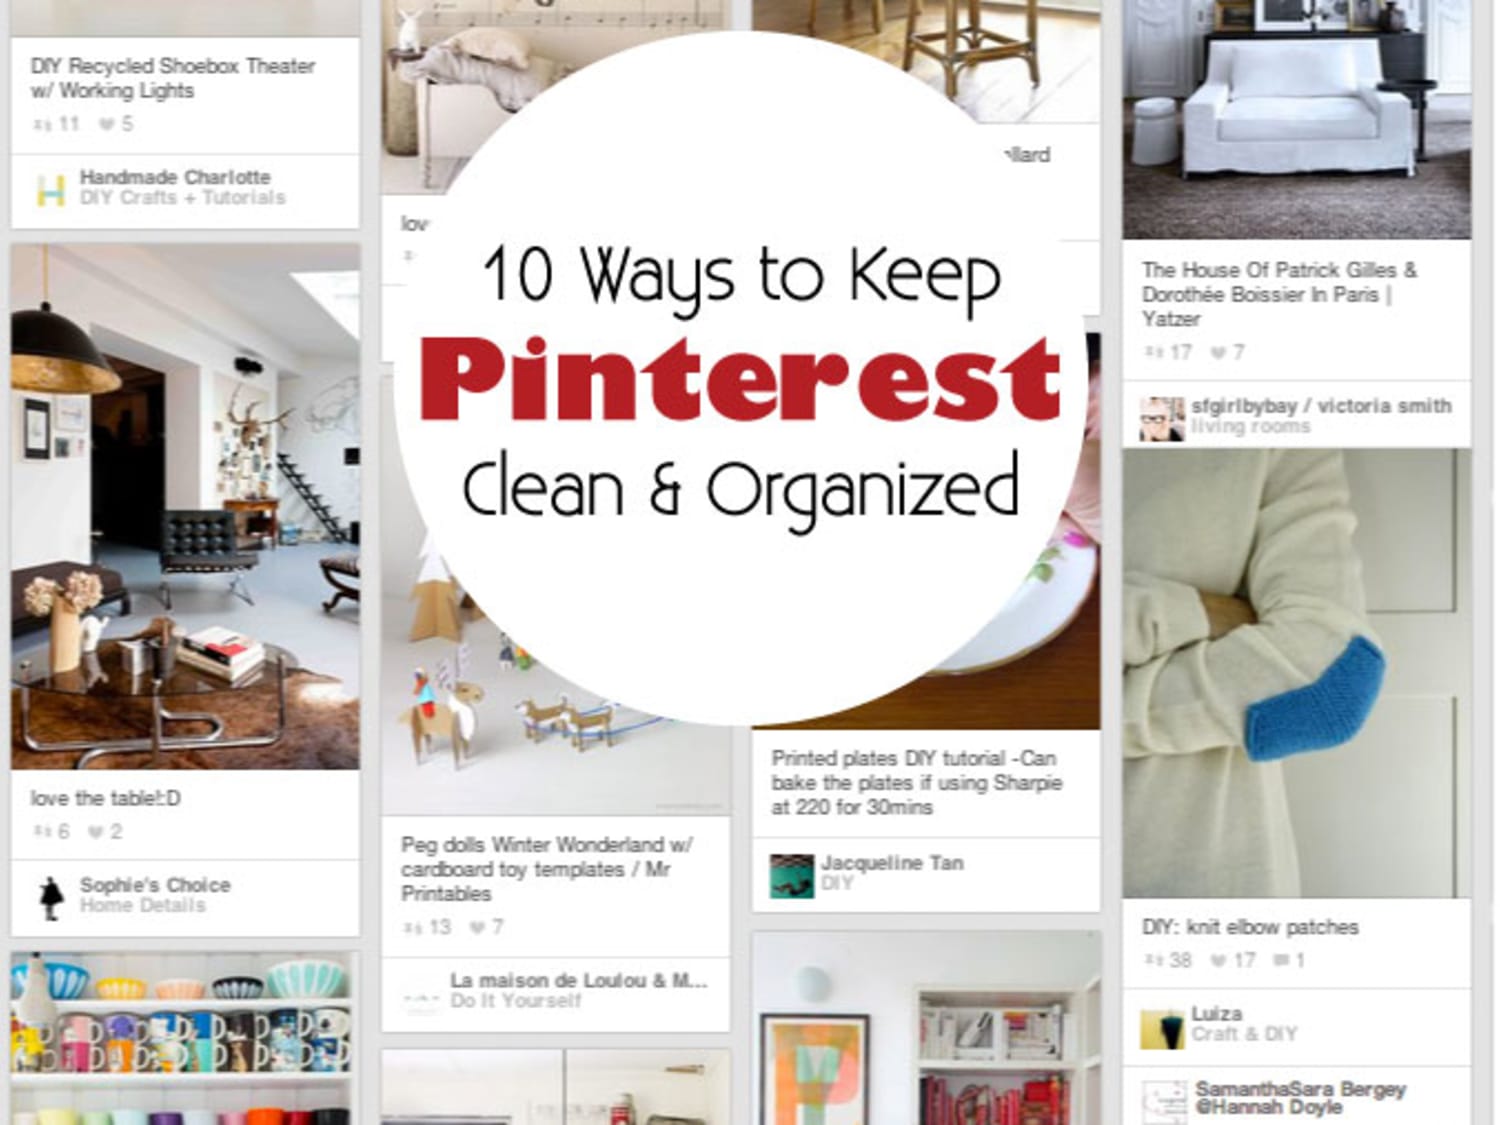 Pins Piling Up? 5 Ways to Keep Your Pinterest Boards Clean & Organized